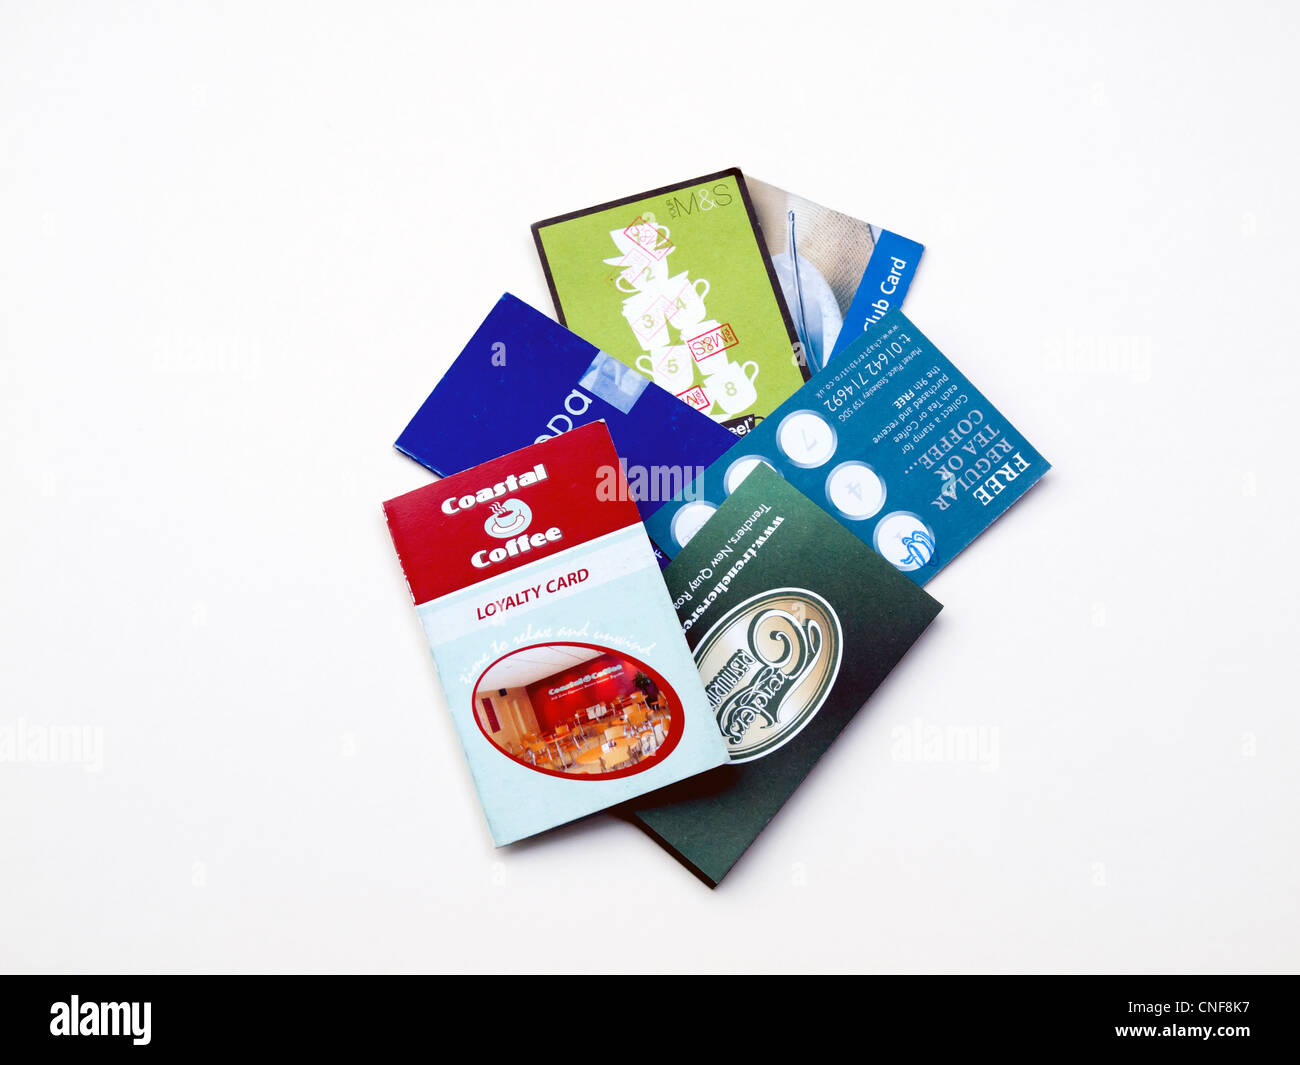 A collection of loyalty cards for cafés and restaurants on a white background Stock Photo